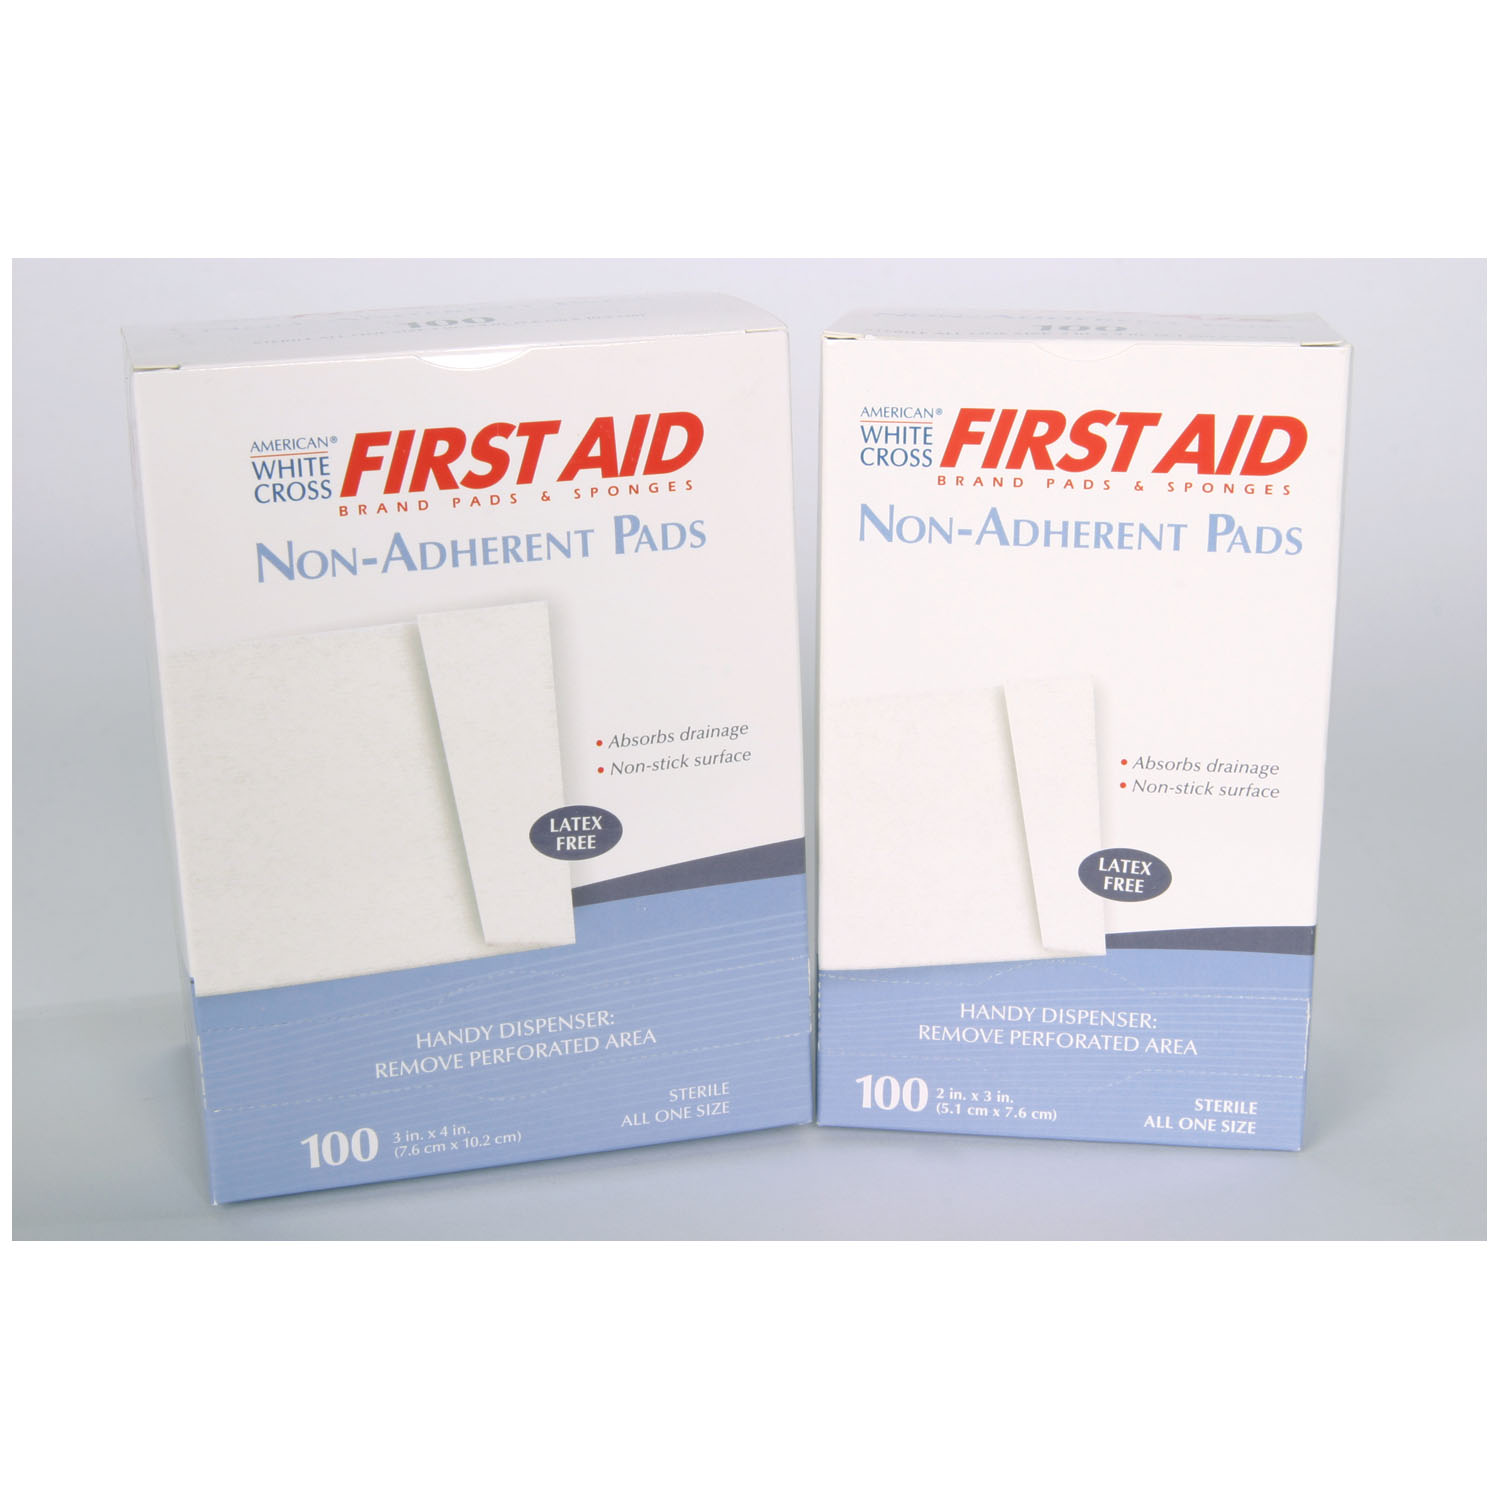 DUKAL NON-ADHERENT STERILE PADS : 7575033 CS $106.29 Stocked